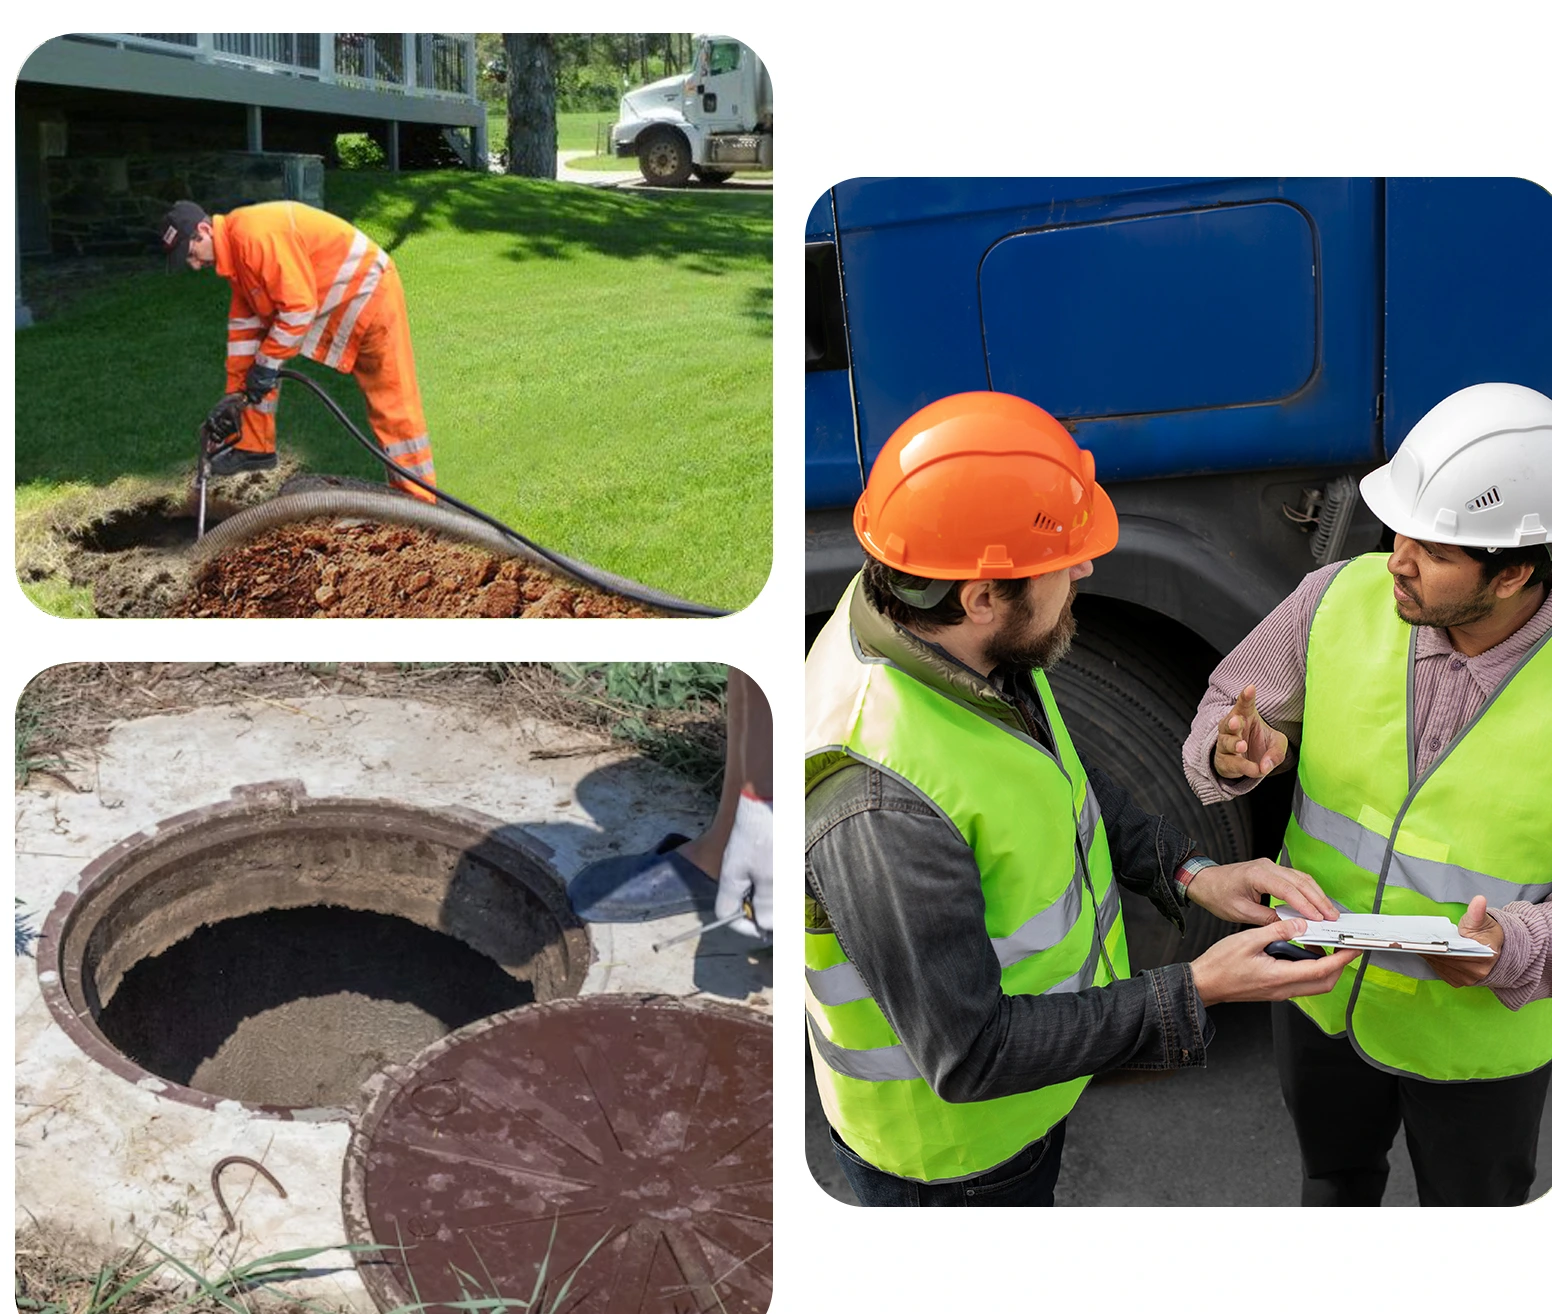 WHEN TO CONTACT SEPTIC INSPECTION COMPANIES